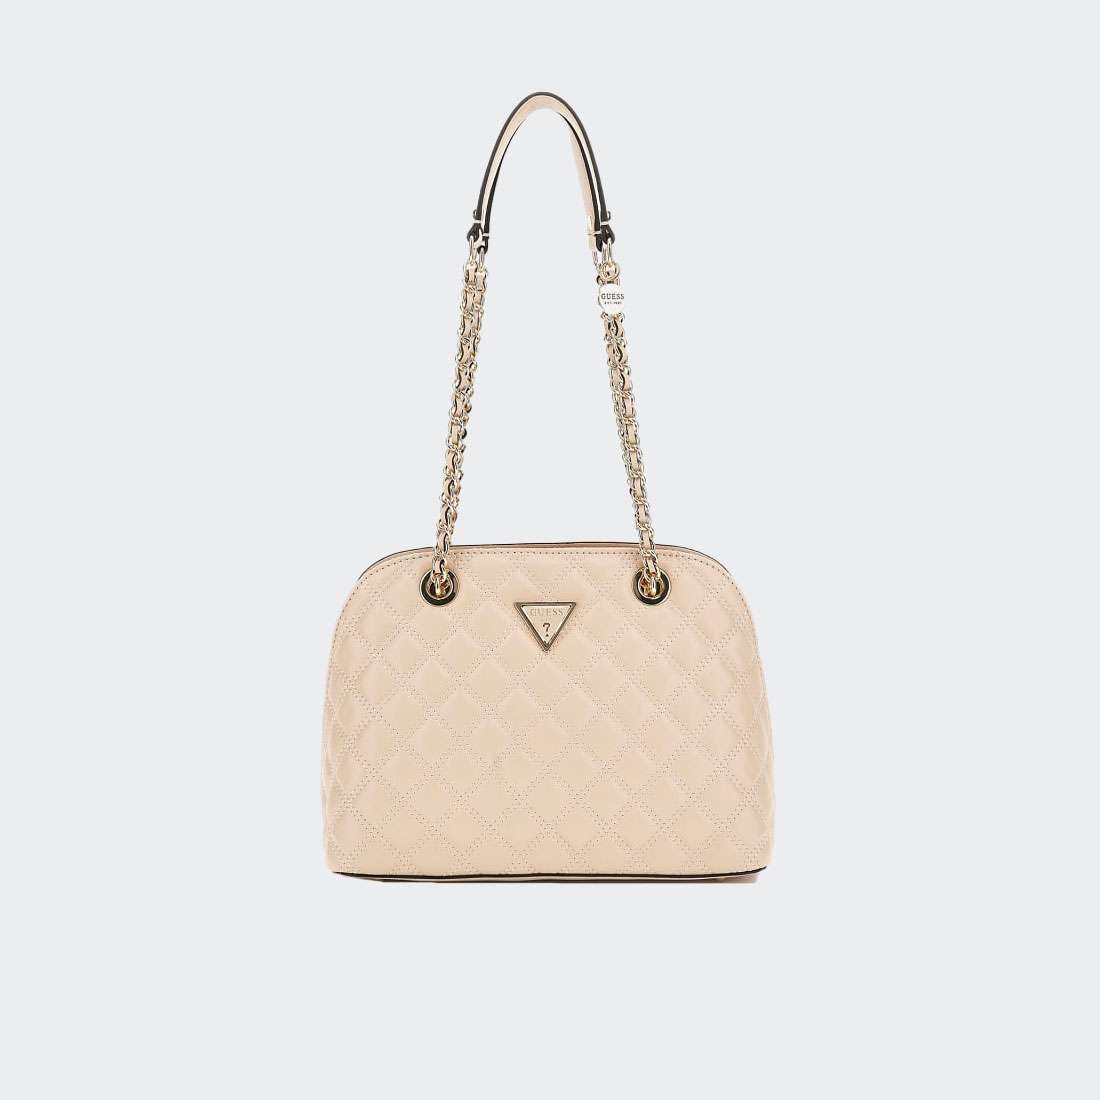 MALA GUESS N GIULLY DOME SATCHEL LIGHT BEIGE